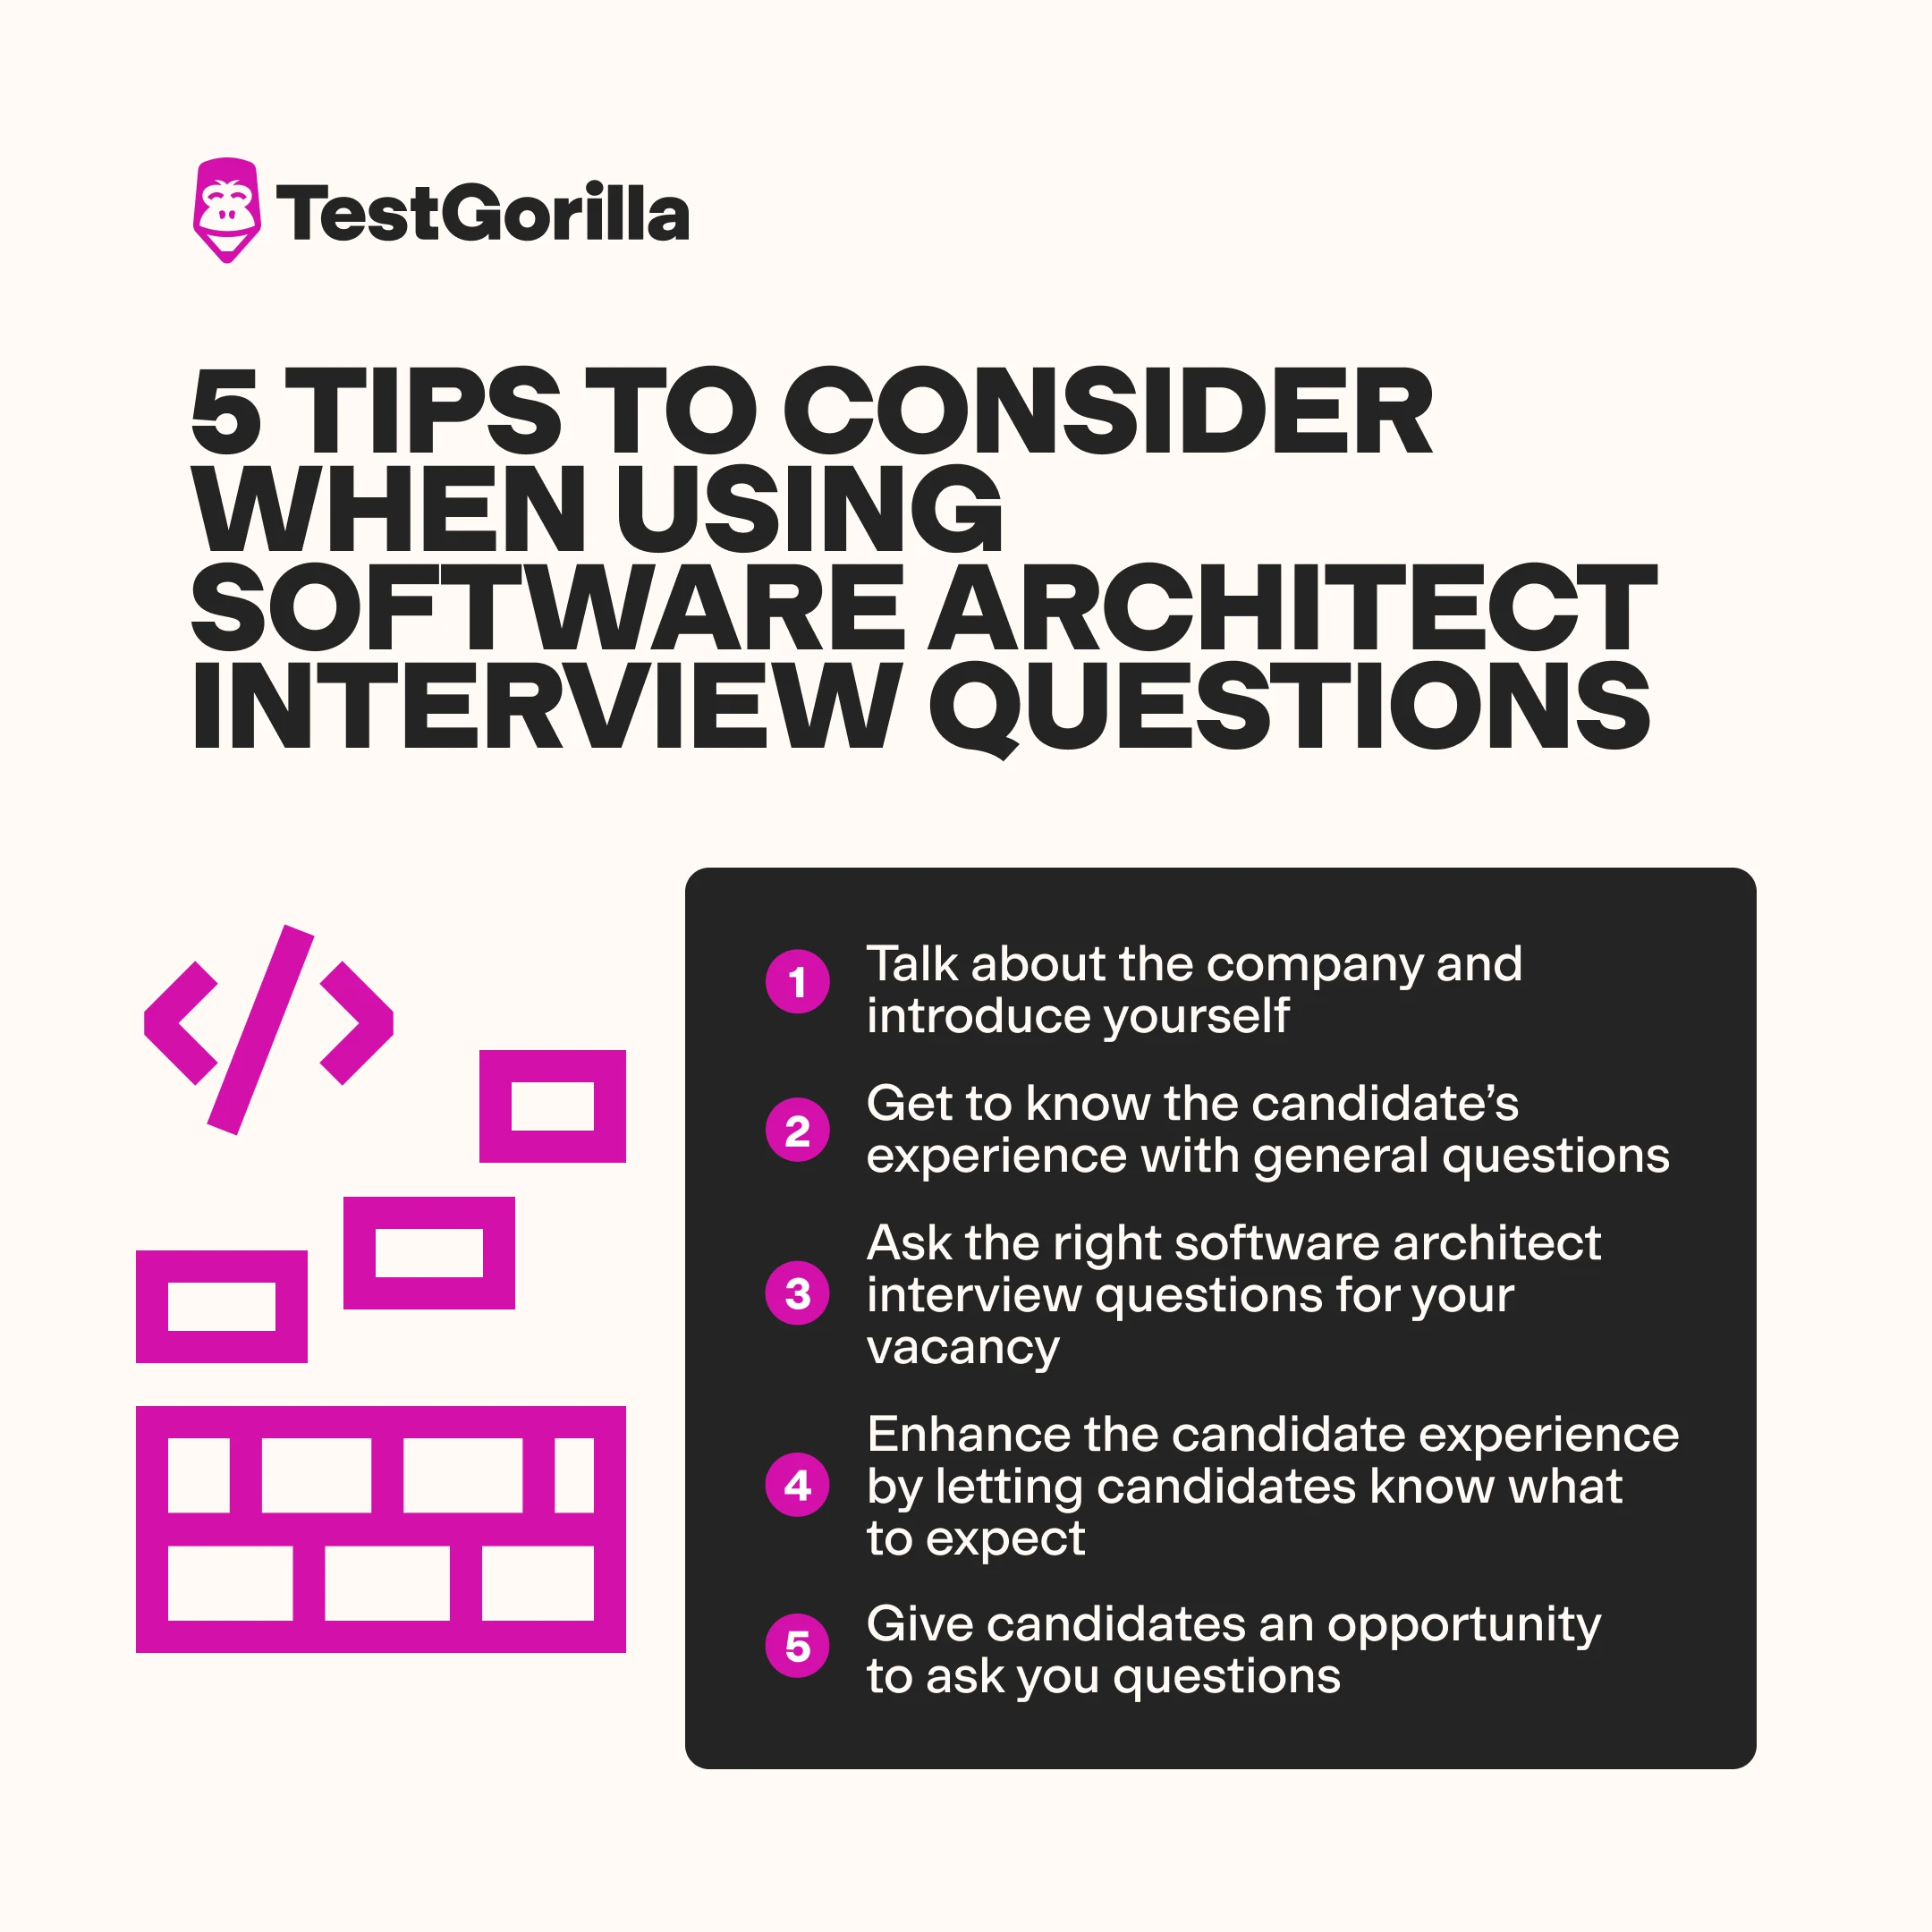 image showing tips to consider when using software architect interview questions